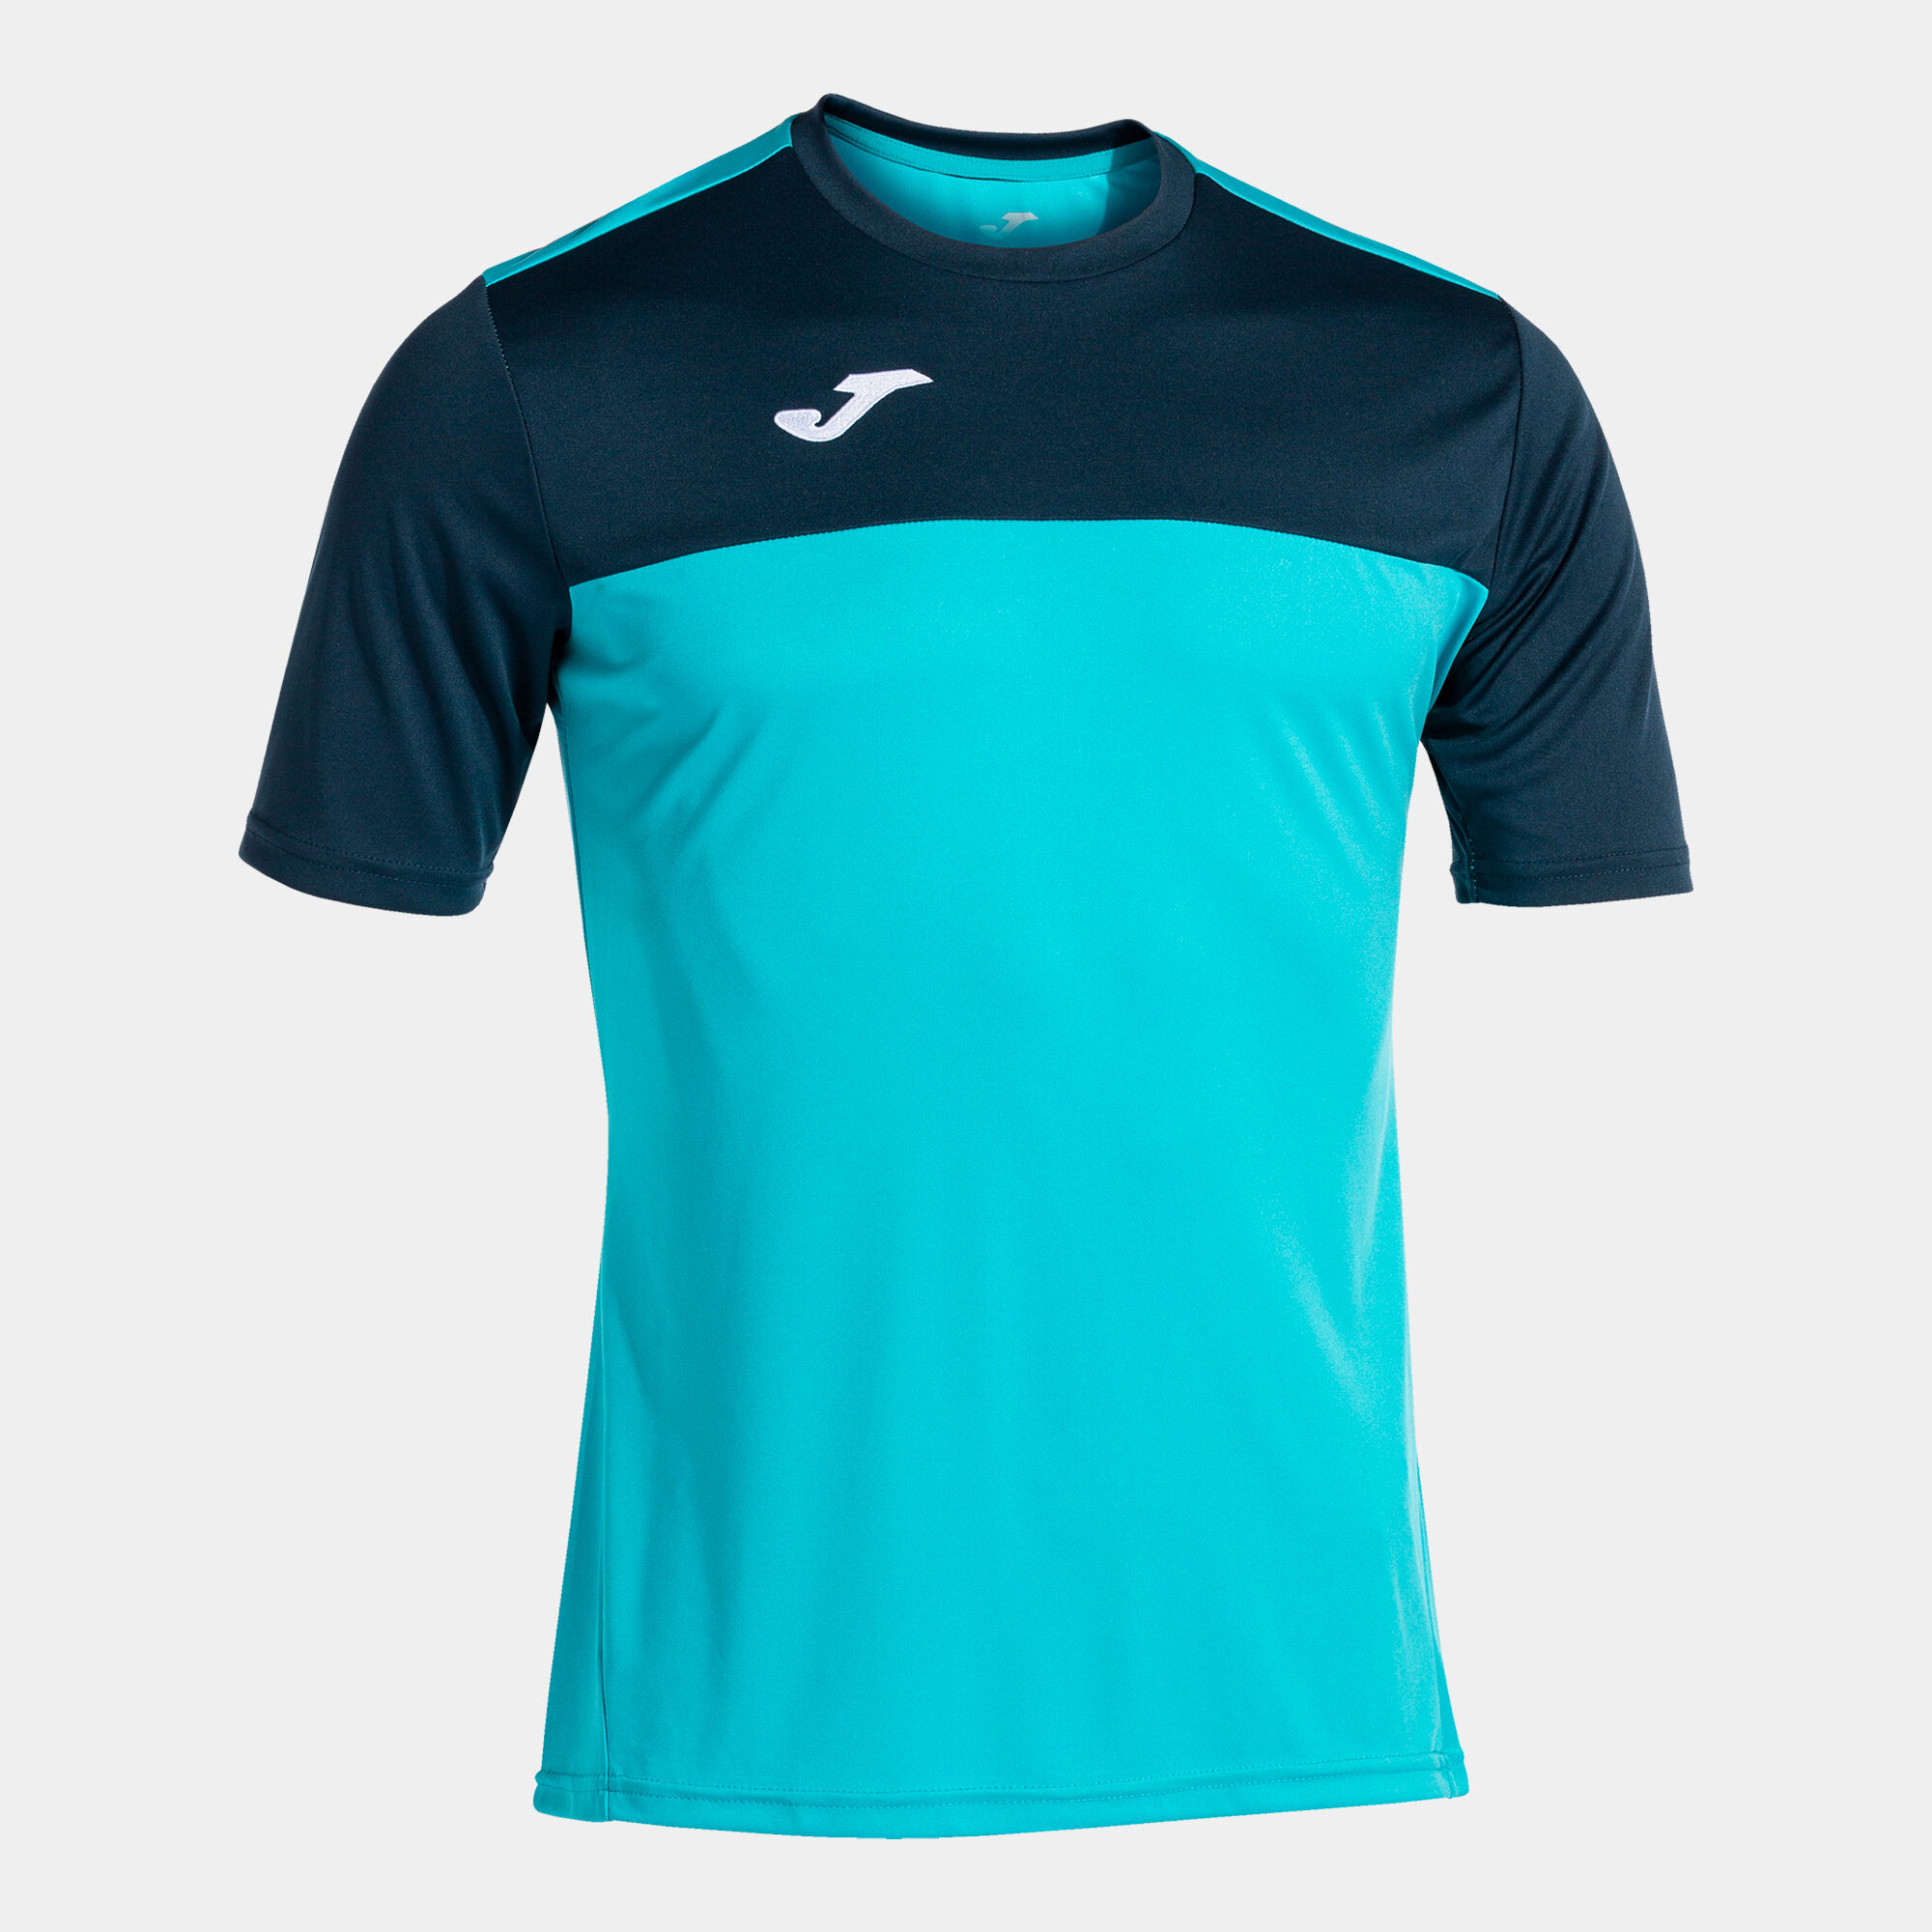 Maillot manches courtes homme Winner turquoise fluo bleu marine